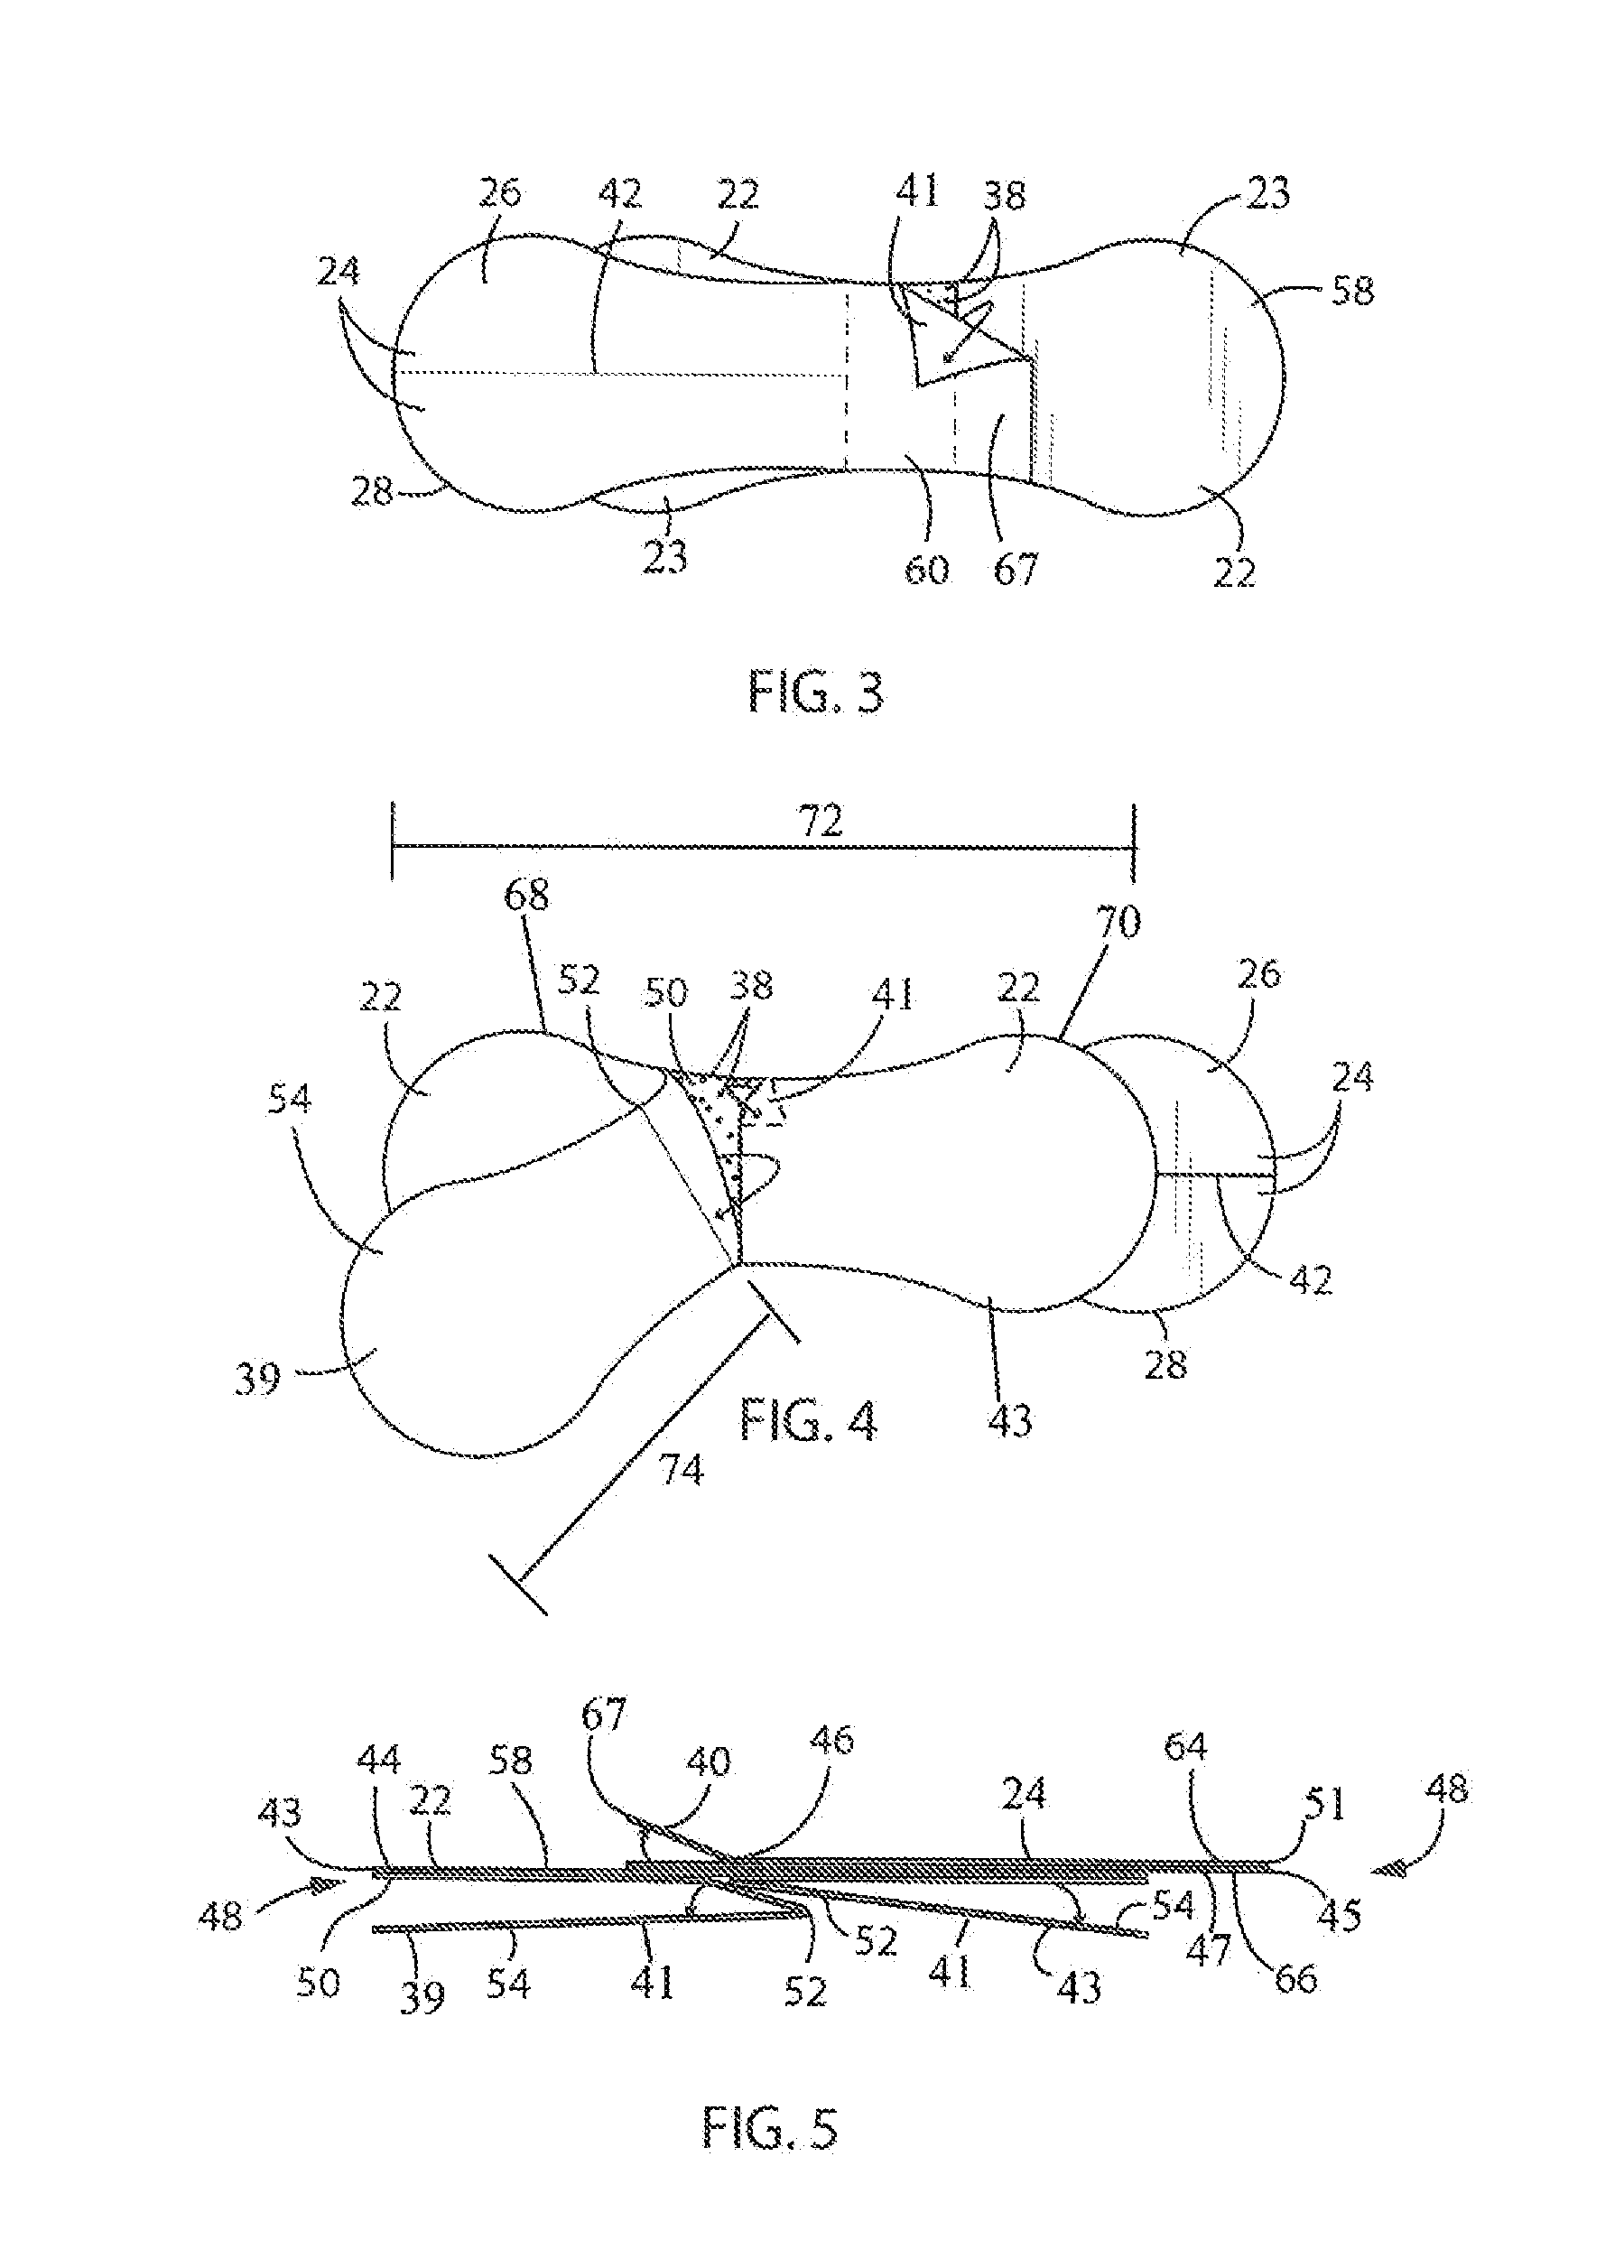 Peripheral Intravenous and Arterial Catheter Securement Device